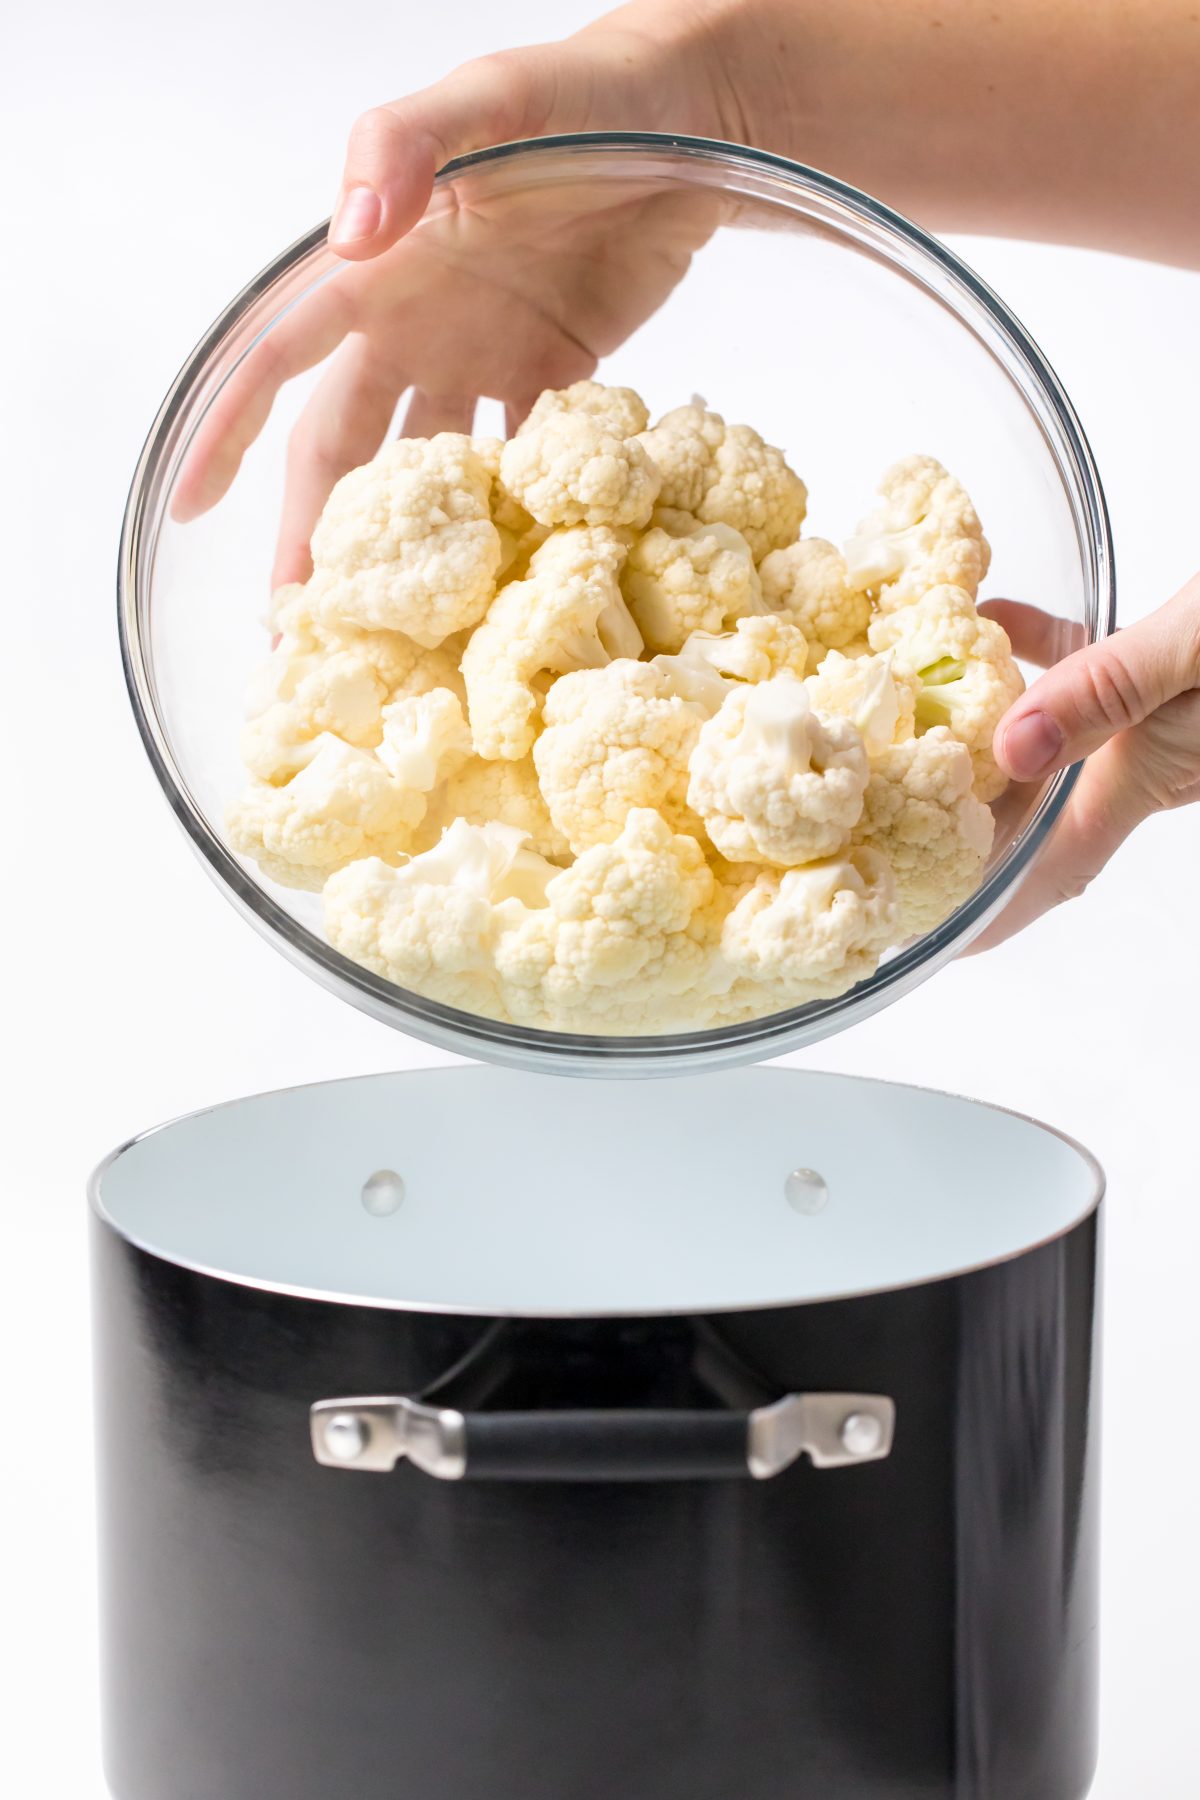 Cook the cauliflower in a large pot of boiling water